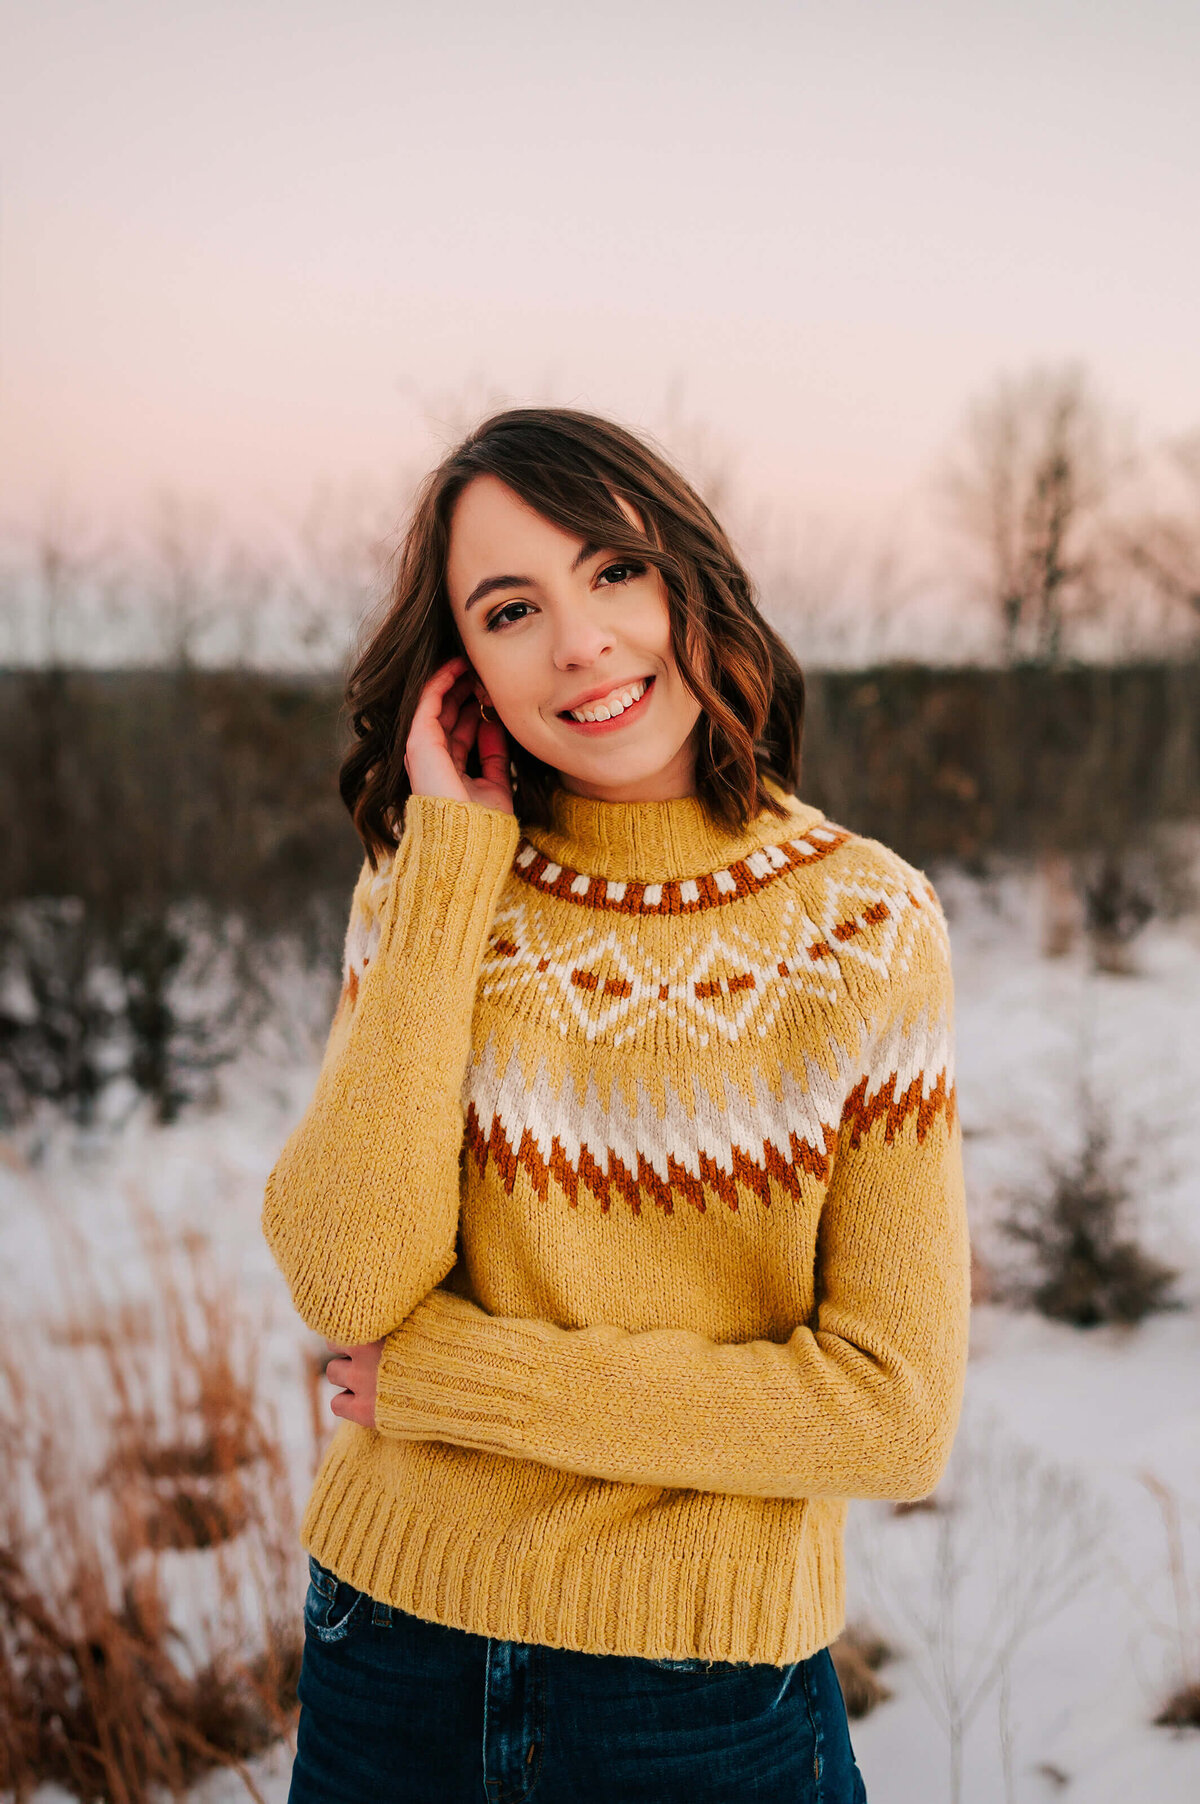 Springfield Mo senior photographer Jessica Kennedy of The XO Photography of senior girl smiling in the snow at sunset